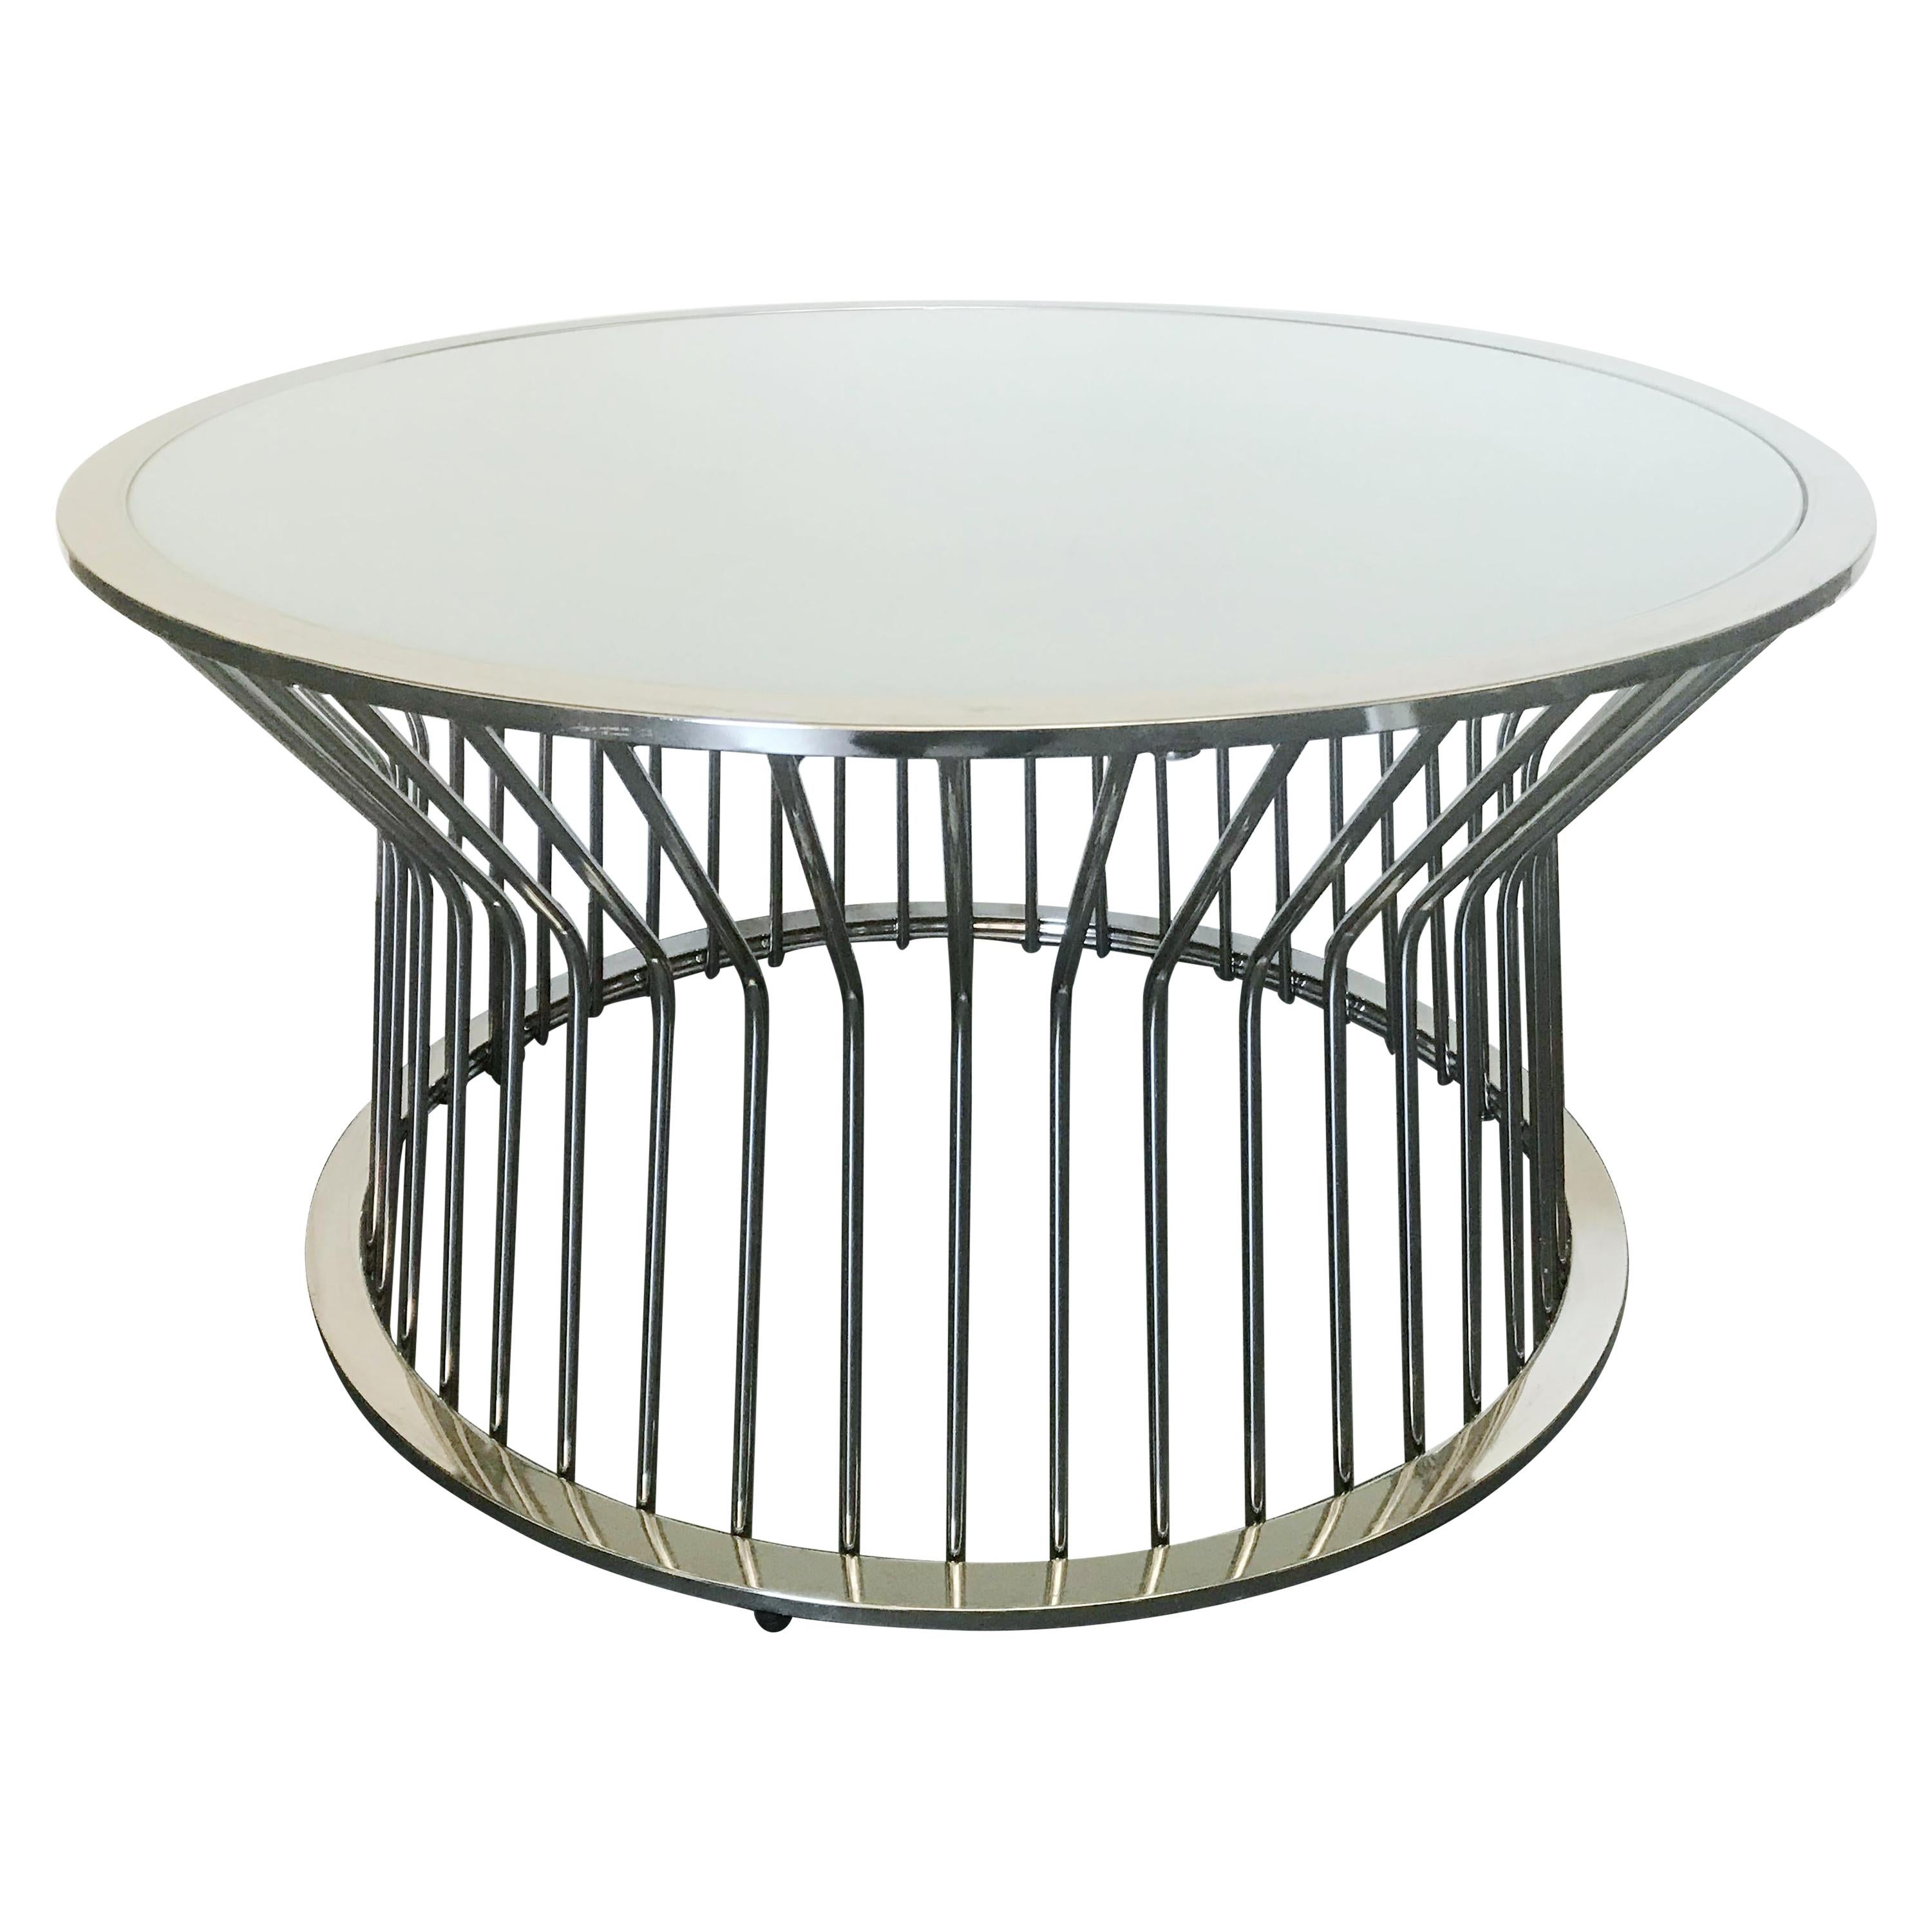 Drum Coffee Table FINAL CLEARANCE SALE